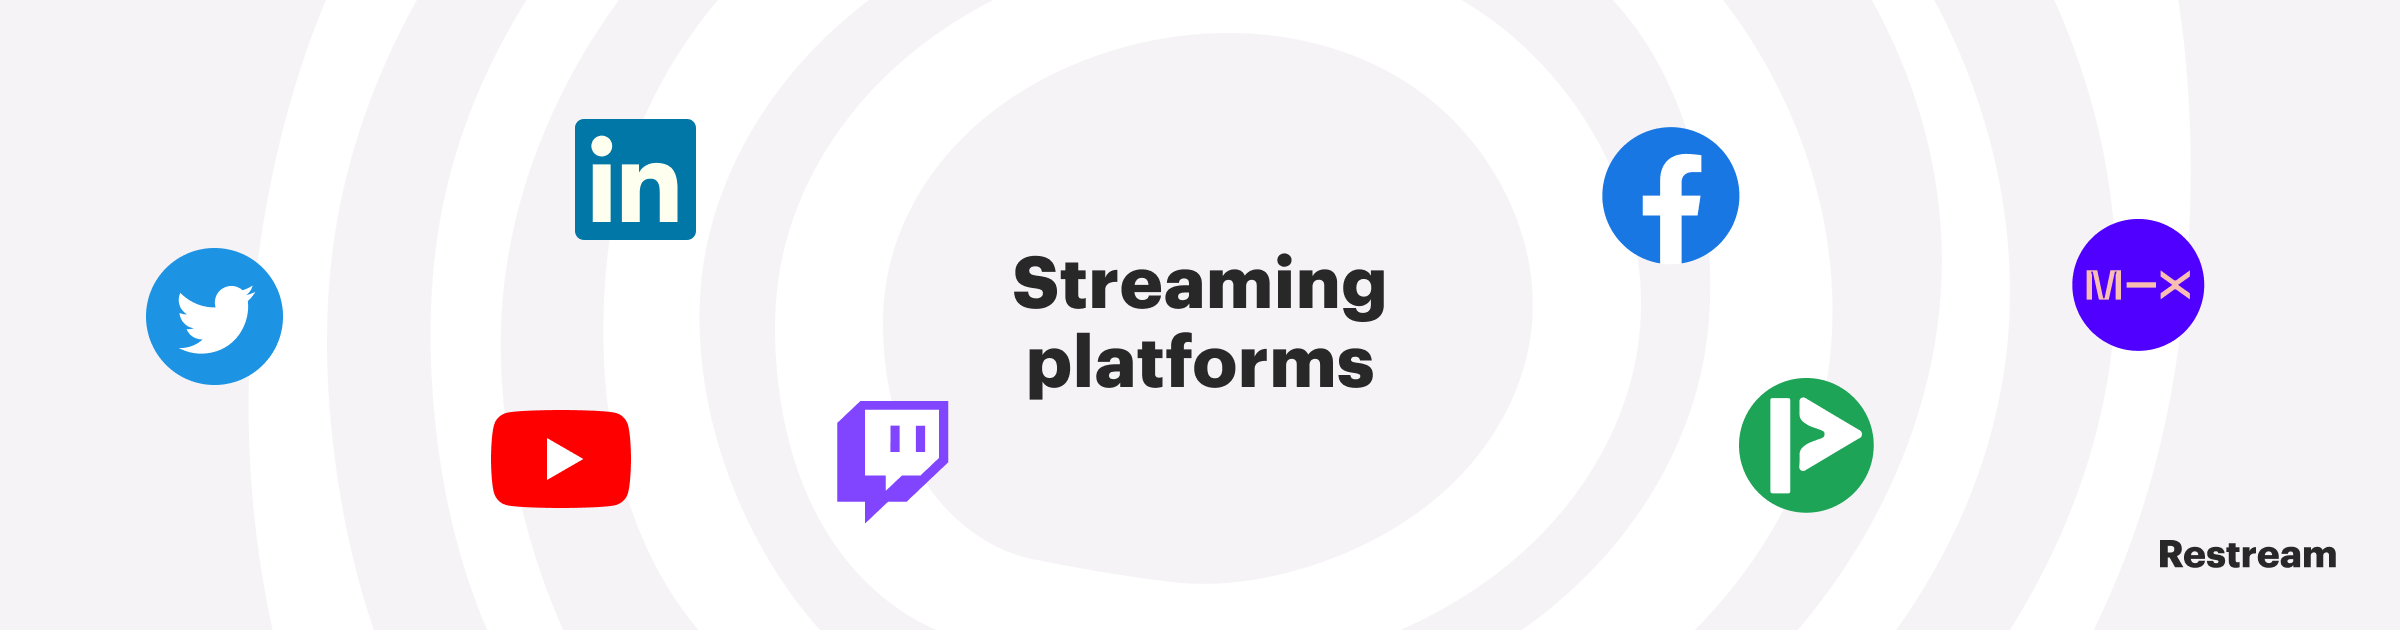 Icons of live streaming platforms